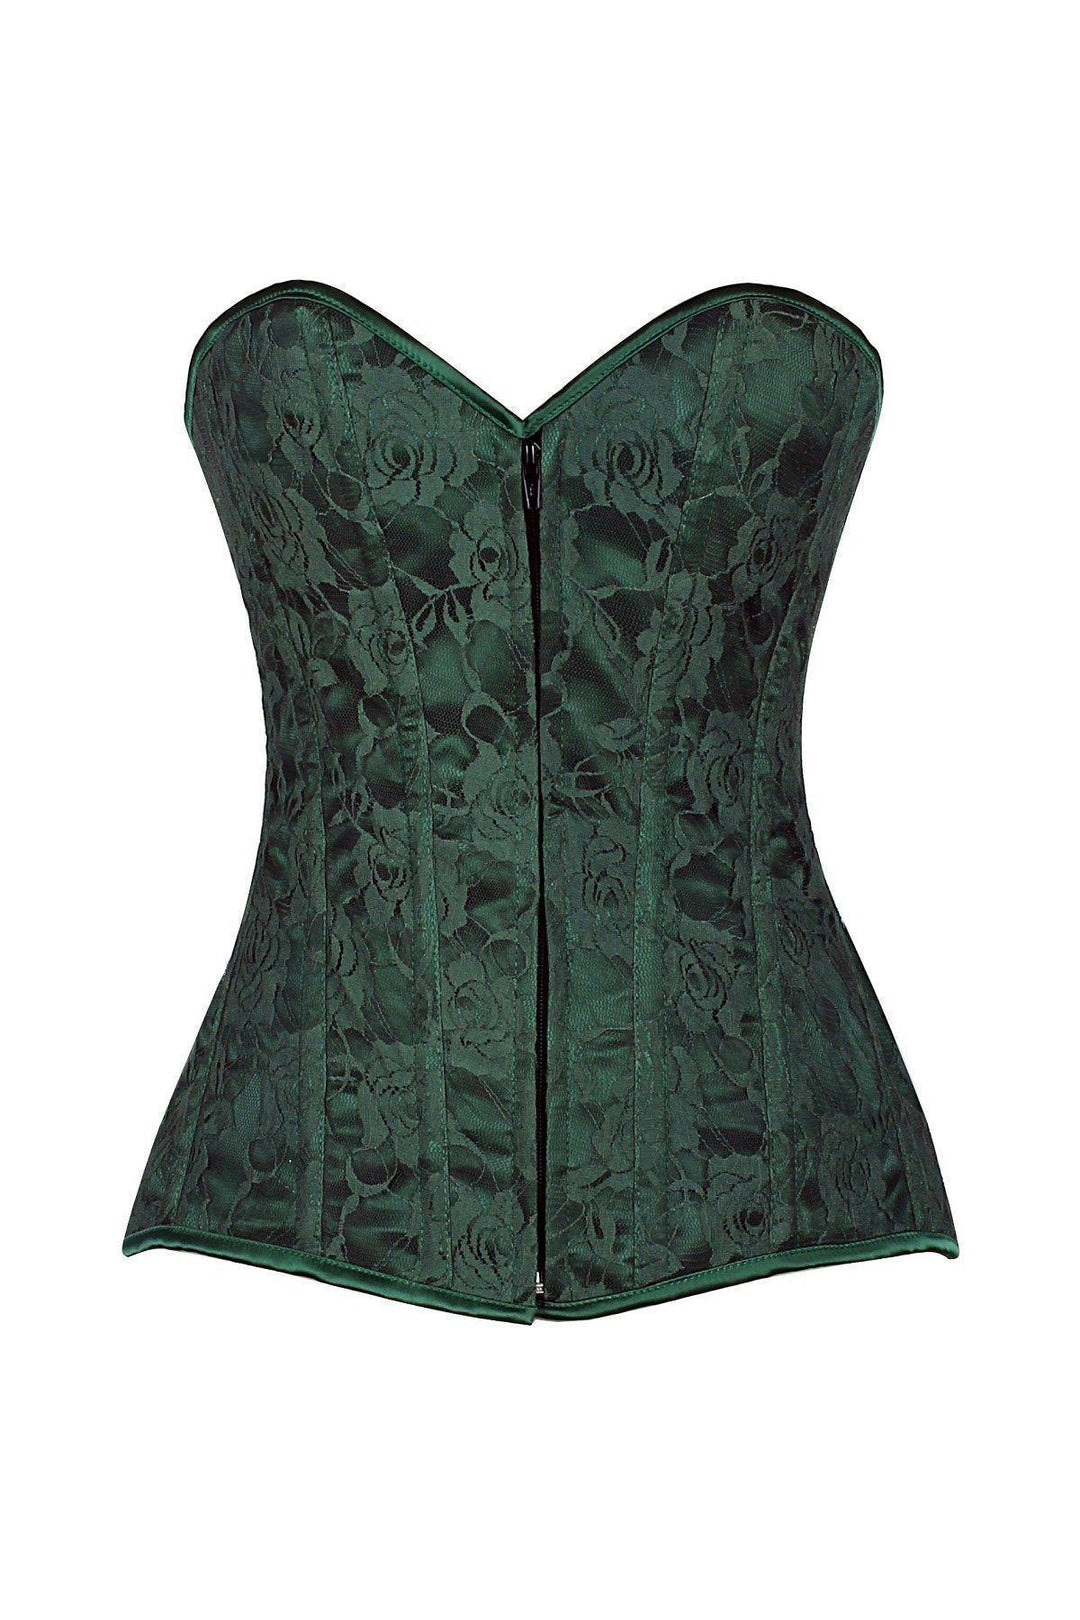 Lavish Dark Green Lace Overbust Corset with Zipper-Daisy Corsets-SEXYSHOES.COM